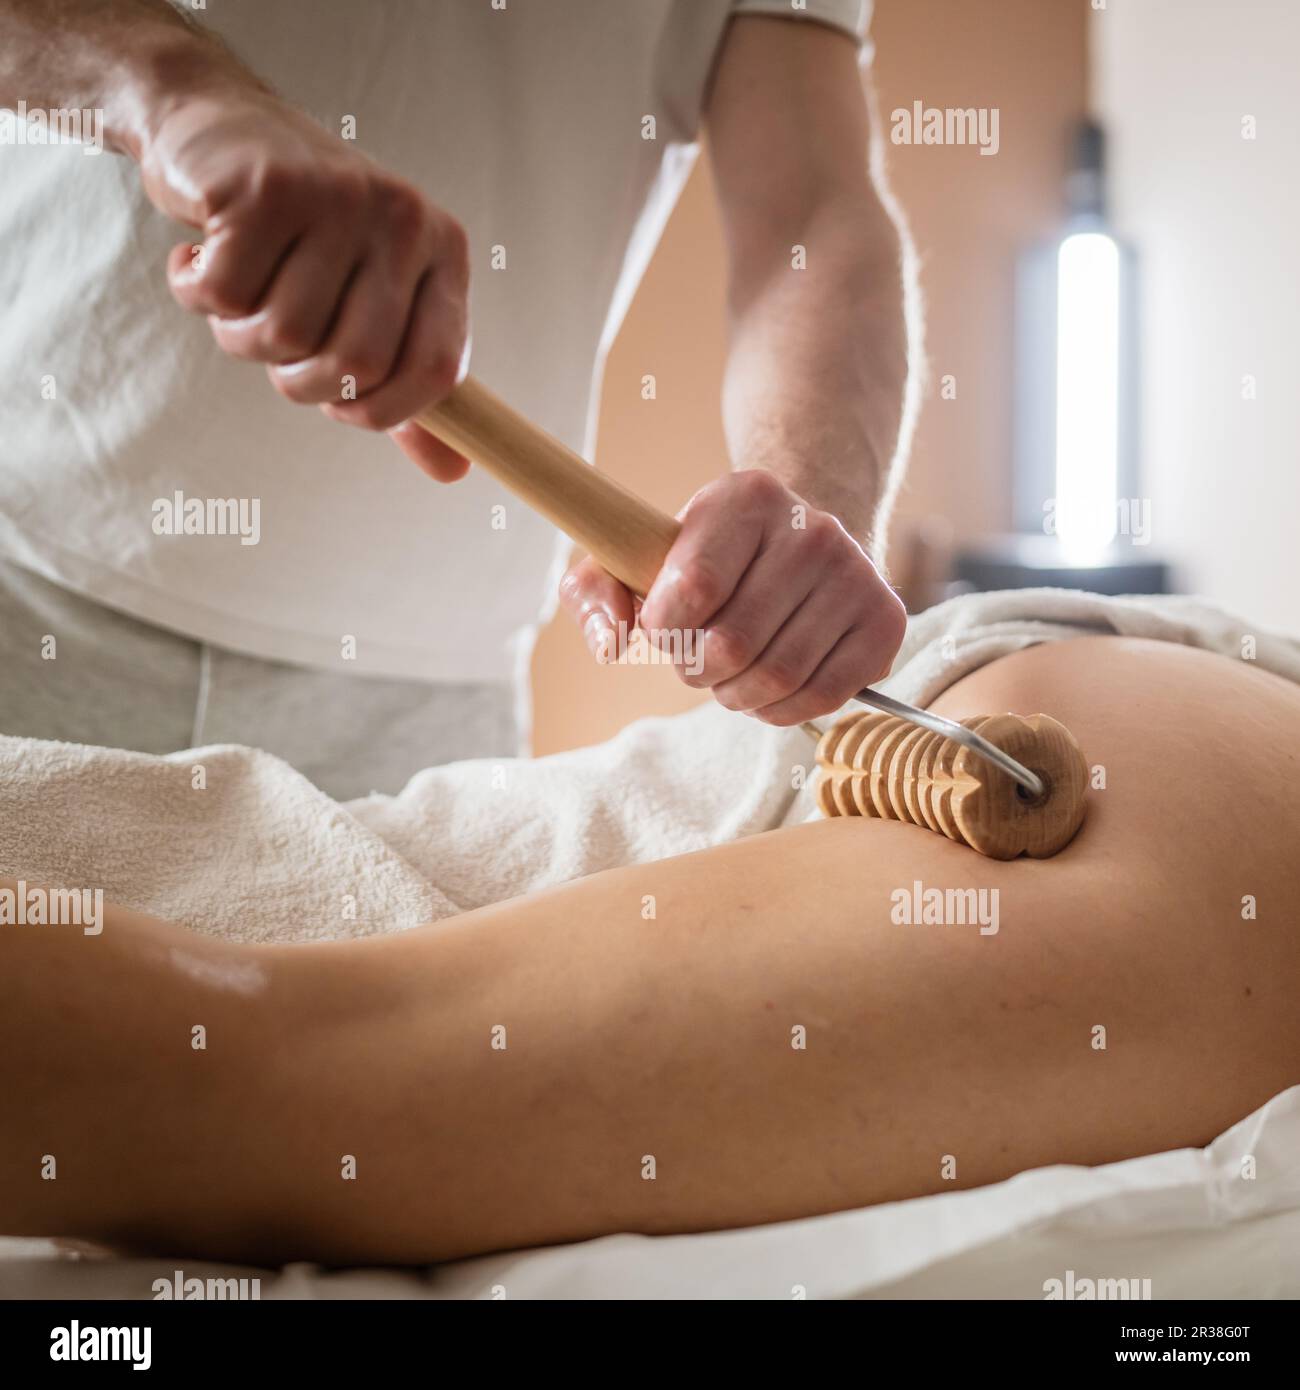 https://c8.alamy.com/comp/2R38G0T/unknown-caucasian-woman-having-madero-therapy-massage-anti-cellulite-treatment-by-professional-therapist-holding-wooden-tools-in-hands-in-studio-or-sa-2R38G0T.jpg